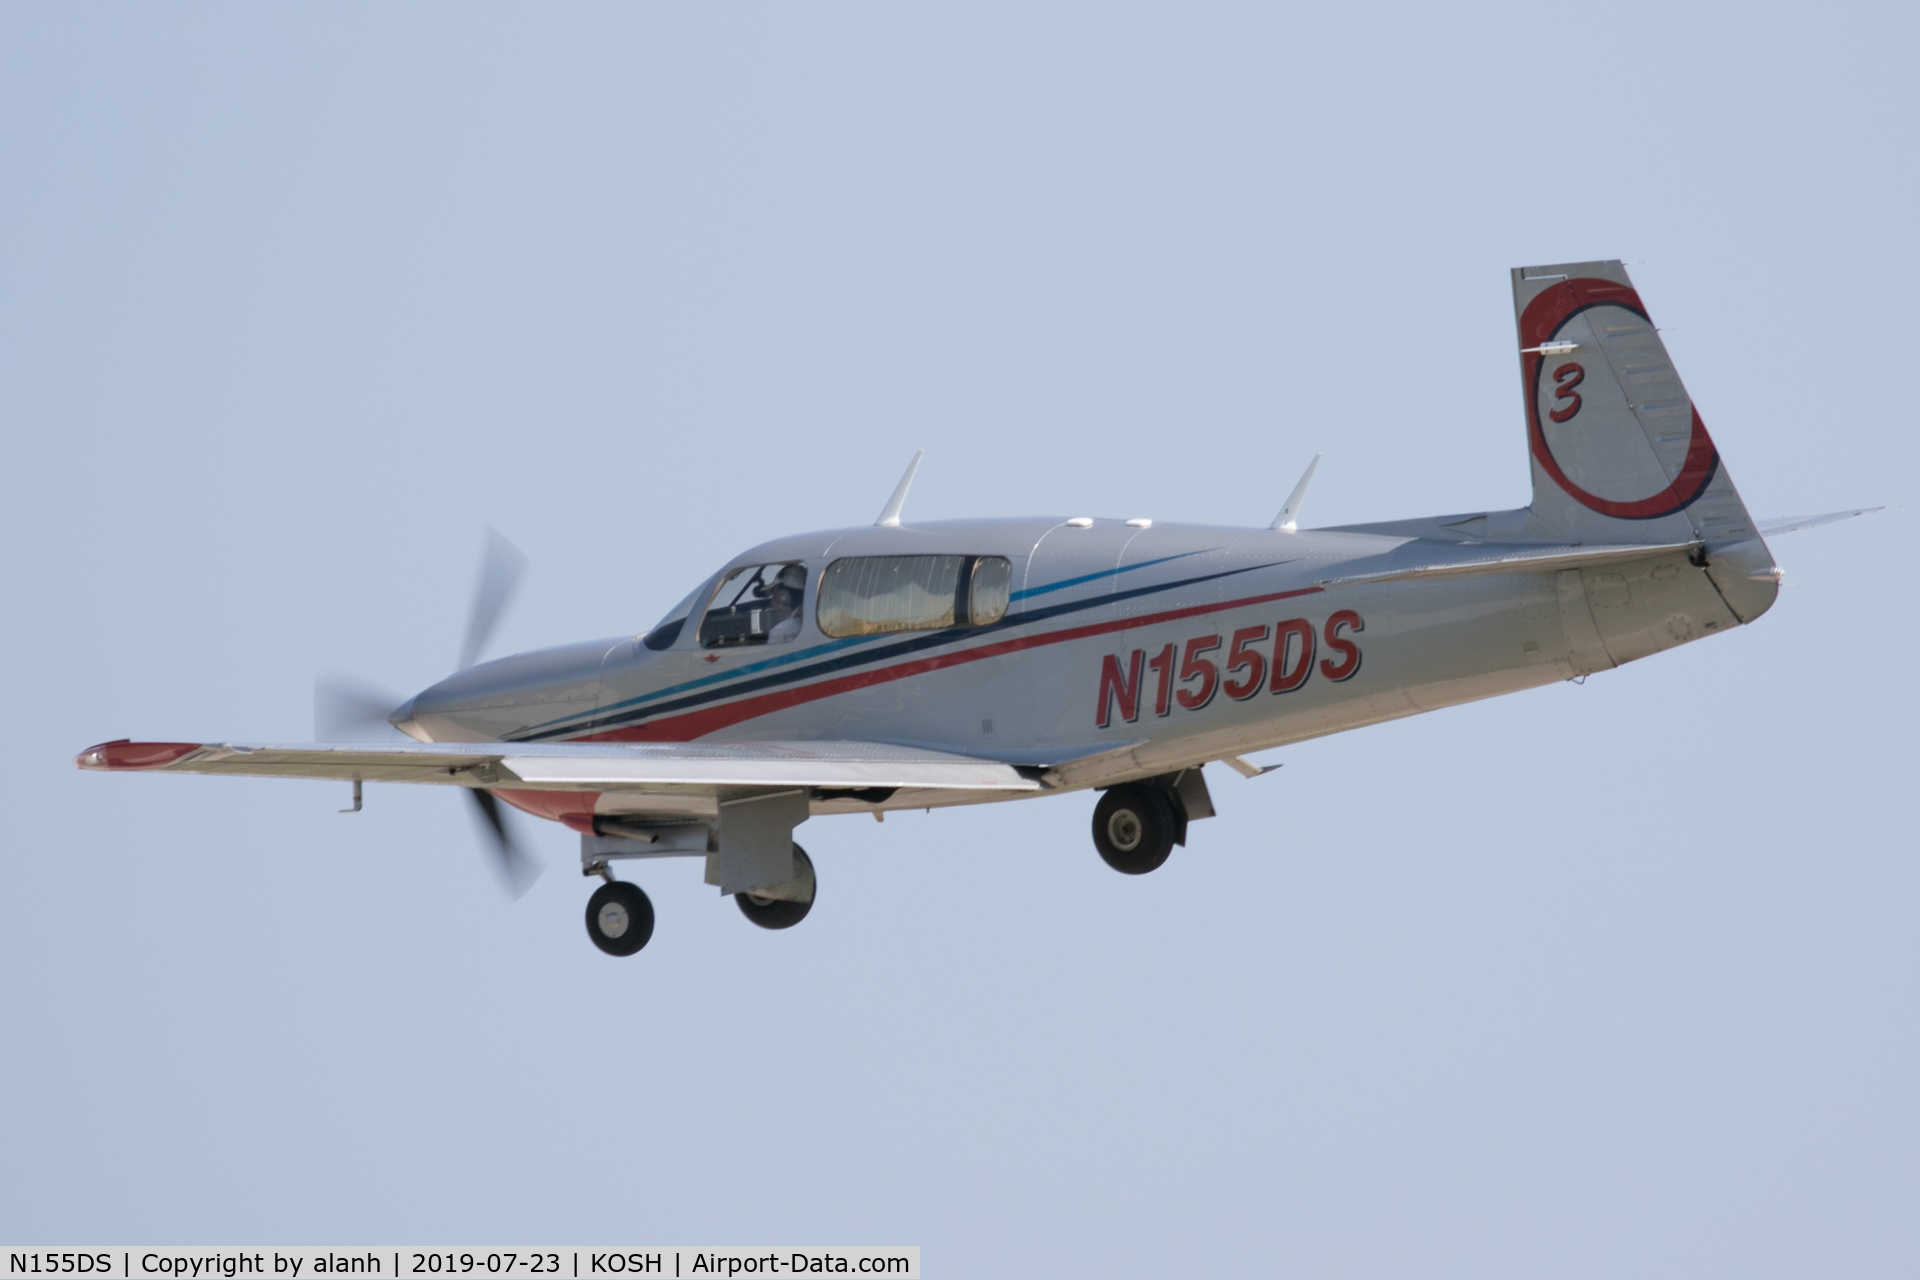 N155DS, 2006 Mooney M20R Ovation C/N 29-0444, Arriving at AirVenture 2019